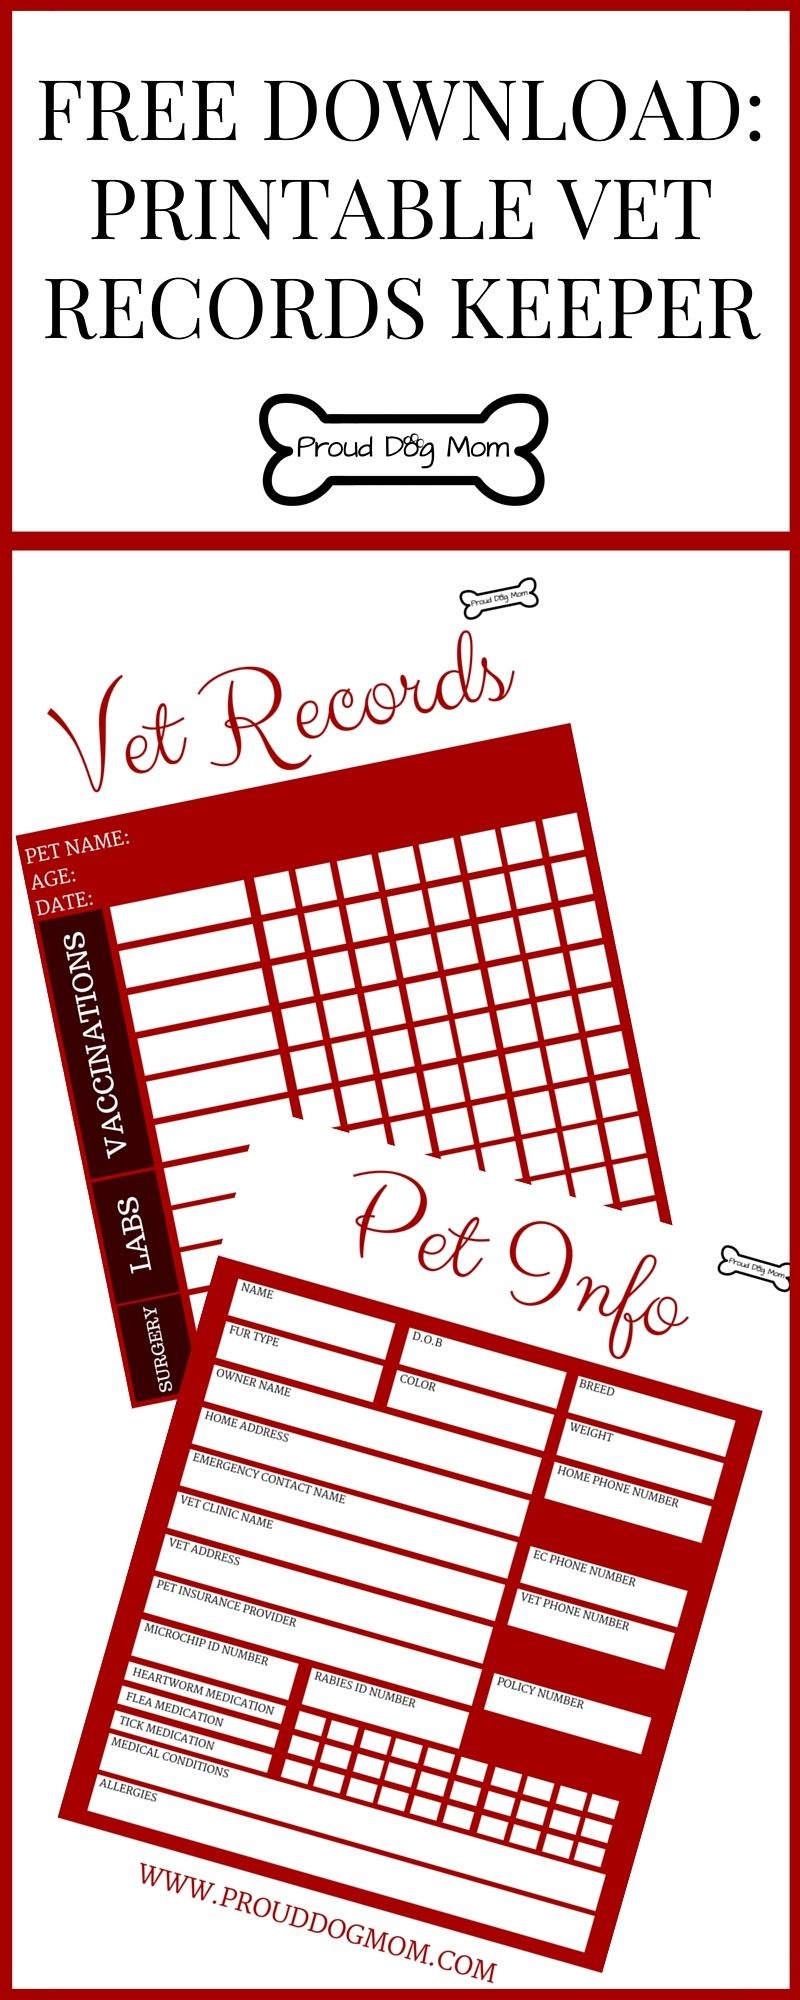 Free Download: Printable Vet Records Keeper | Pets | Dogs, Puppies - Free Printable Dog Shot Records